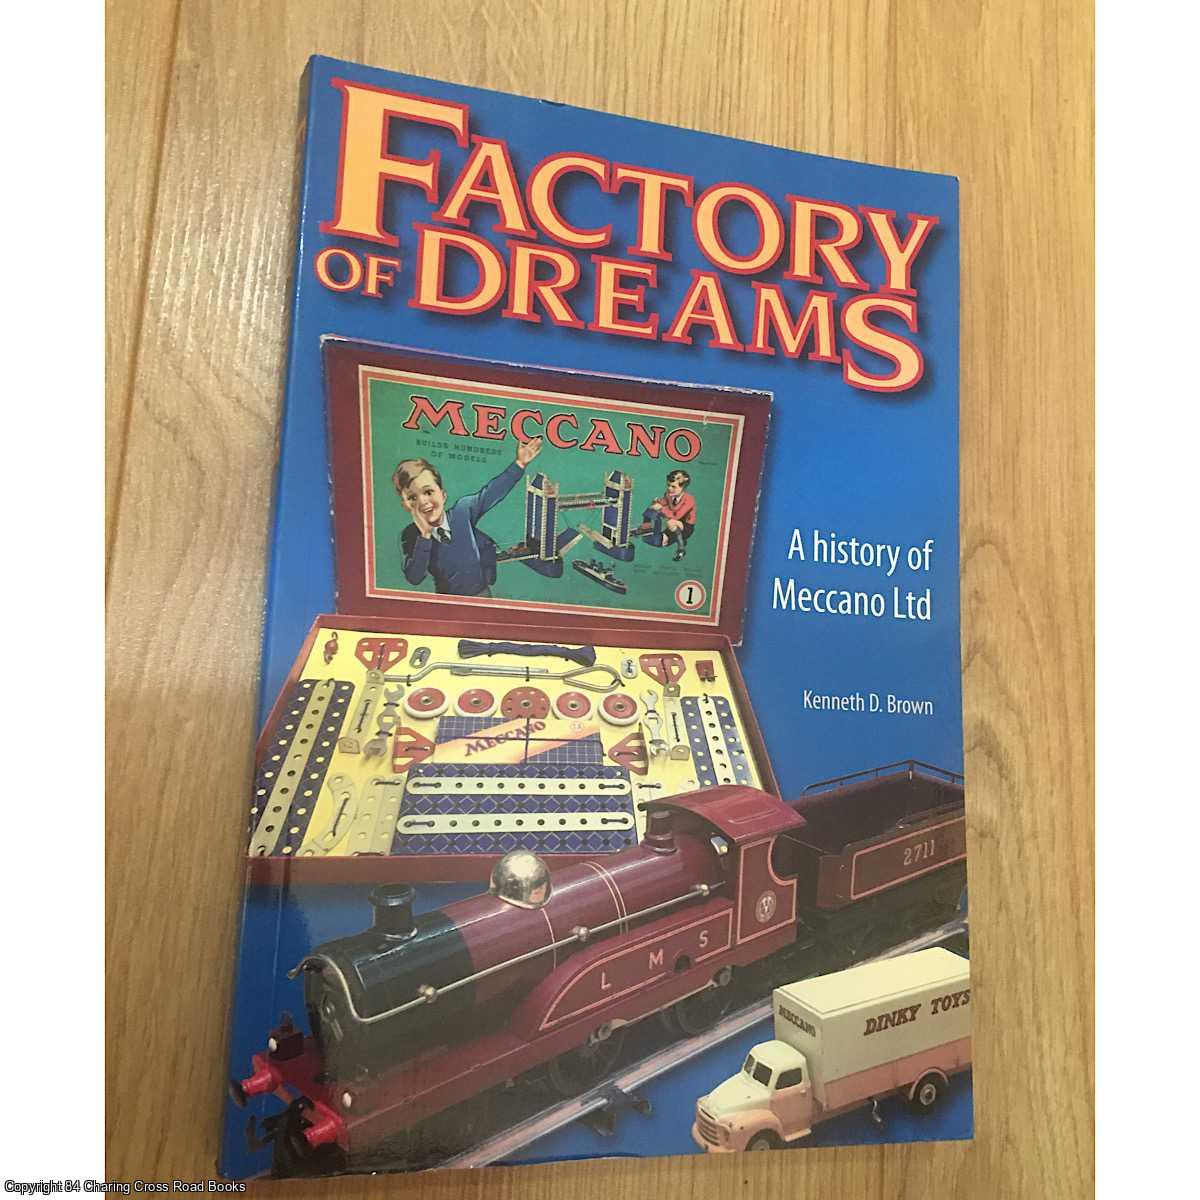 Brown, Kenneth D. - Factory of Dreams - A History of Meccano Ltd